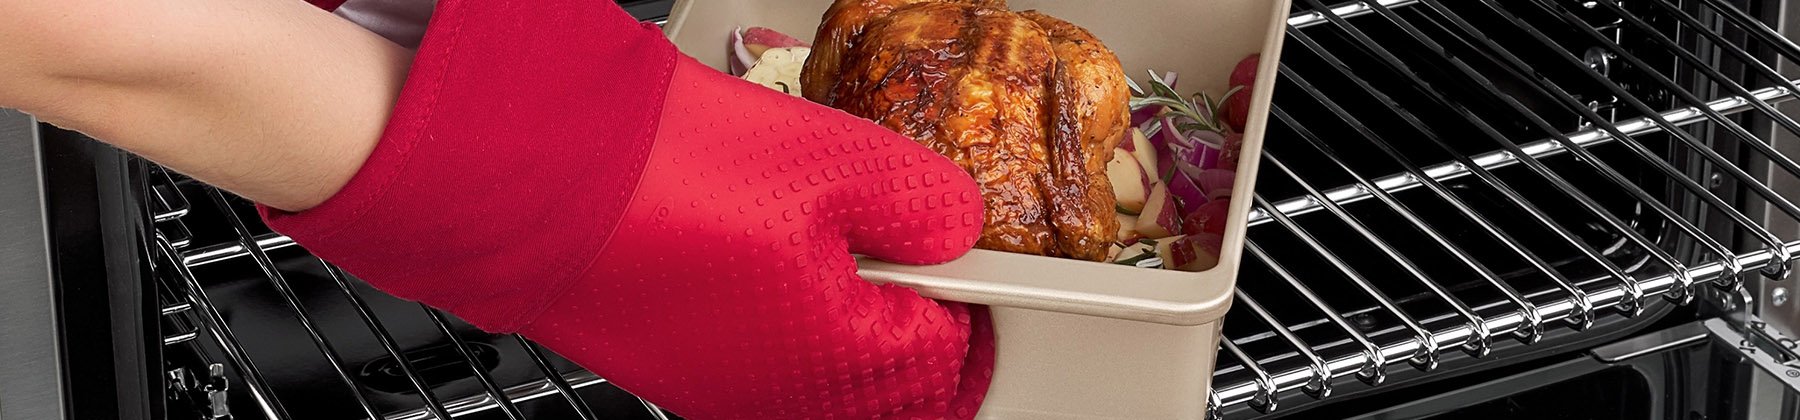 https://cdn.everythingkitchens.com/media/wysiwyg/images/Category_Headers/Oven-Mits-and-Potholders.jpg